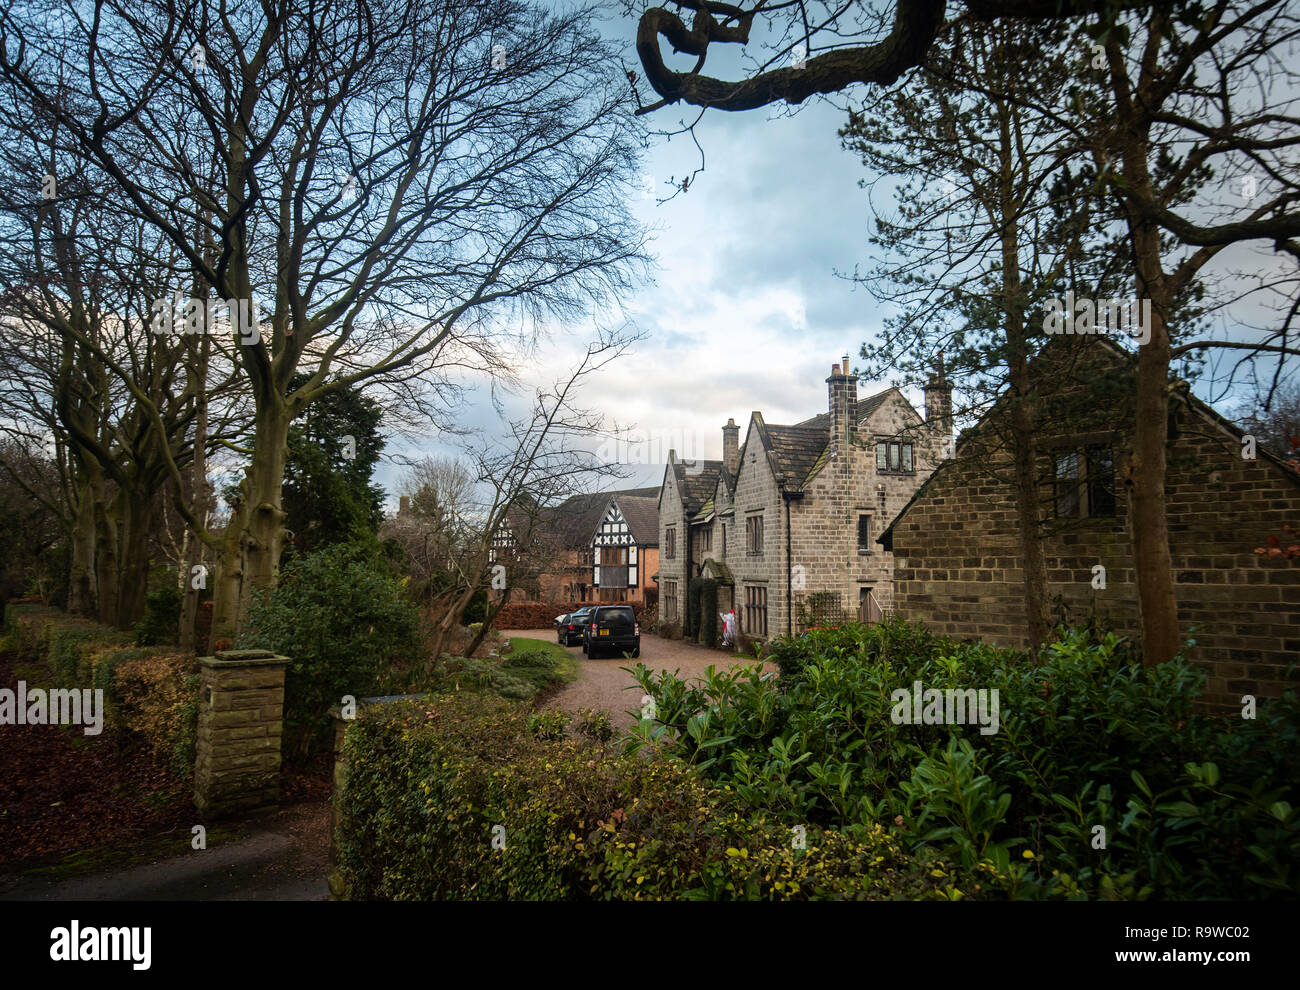 Fulwith Mill Lane in Harrogate which has been identified as the most expensive residential street in Yorkshire and the Humber, with an average house price of Â£1,631,000, in research complied by Lloyds Bank. Stock Photo